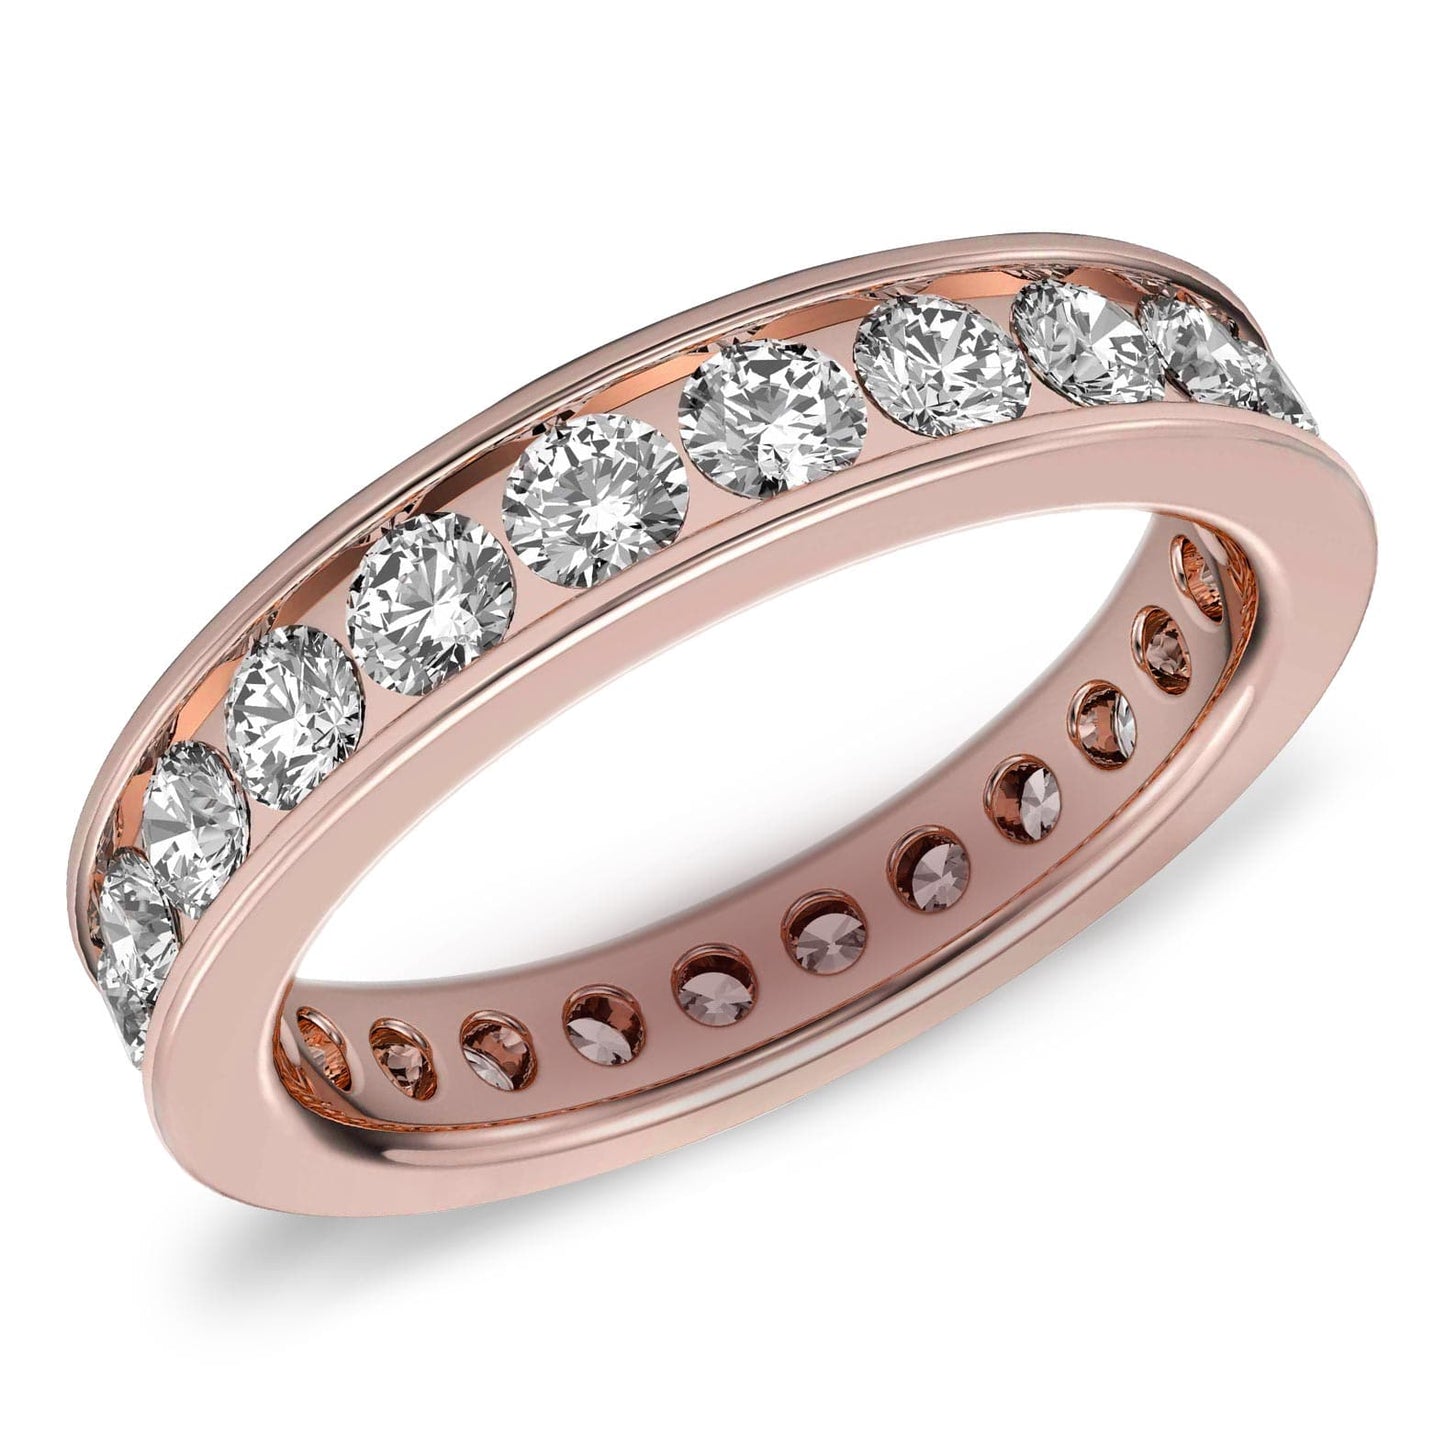 2ct Channel Set Round Diamond Eternity Ring in 14k Gold